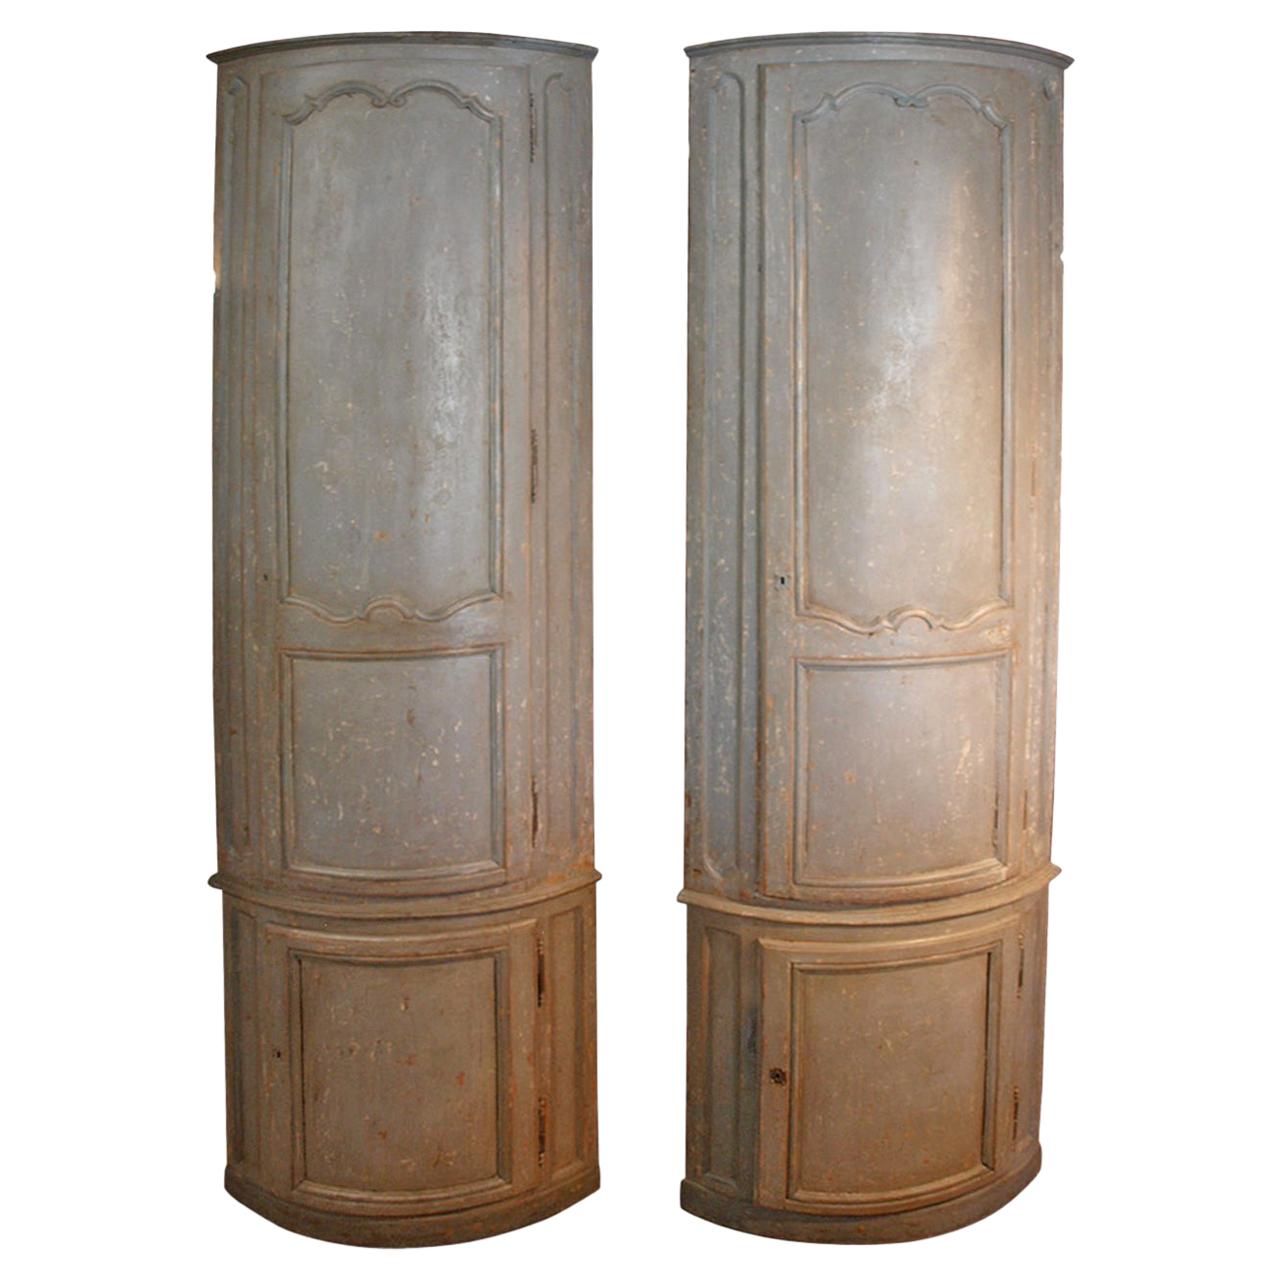 Monumental Pair of French 18th Century Corner Cabinets in Painted Wood